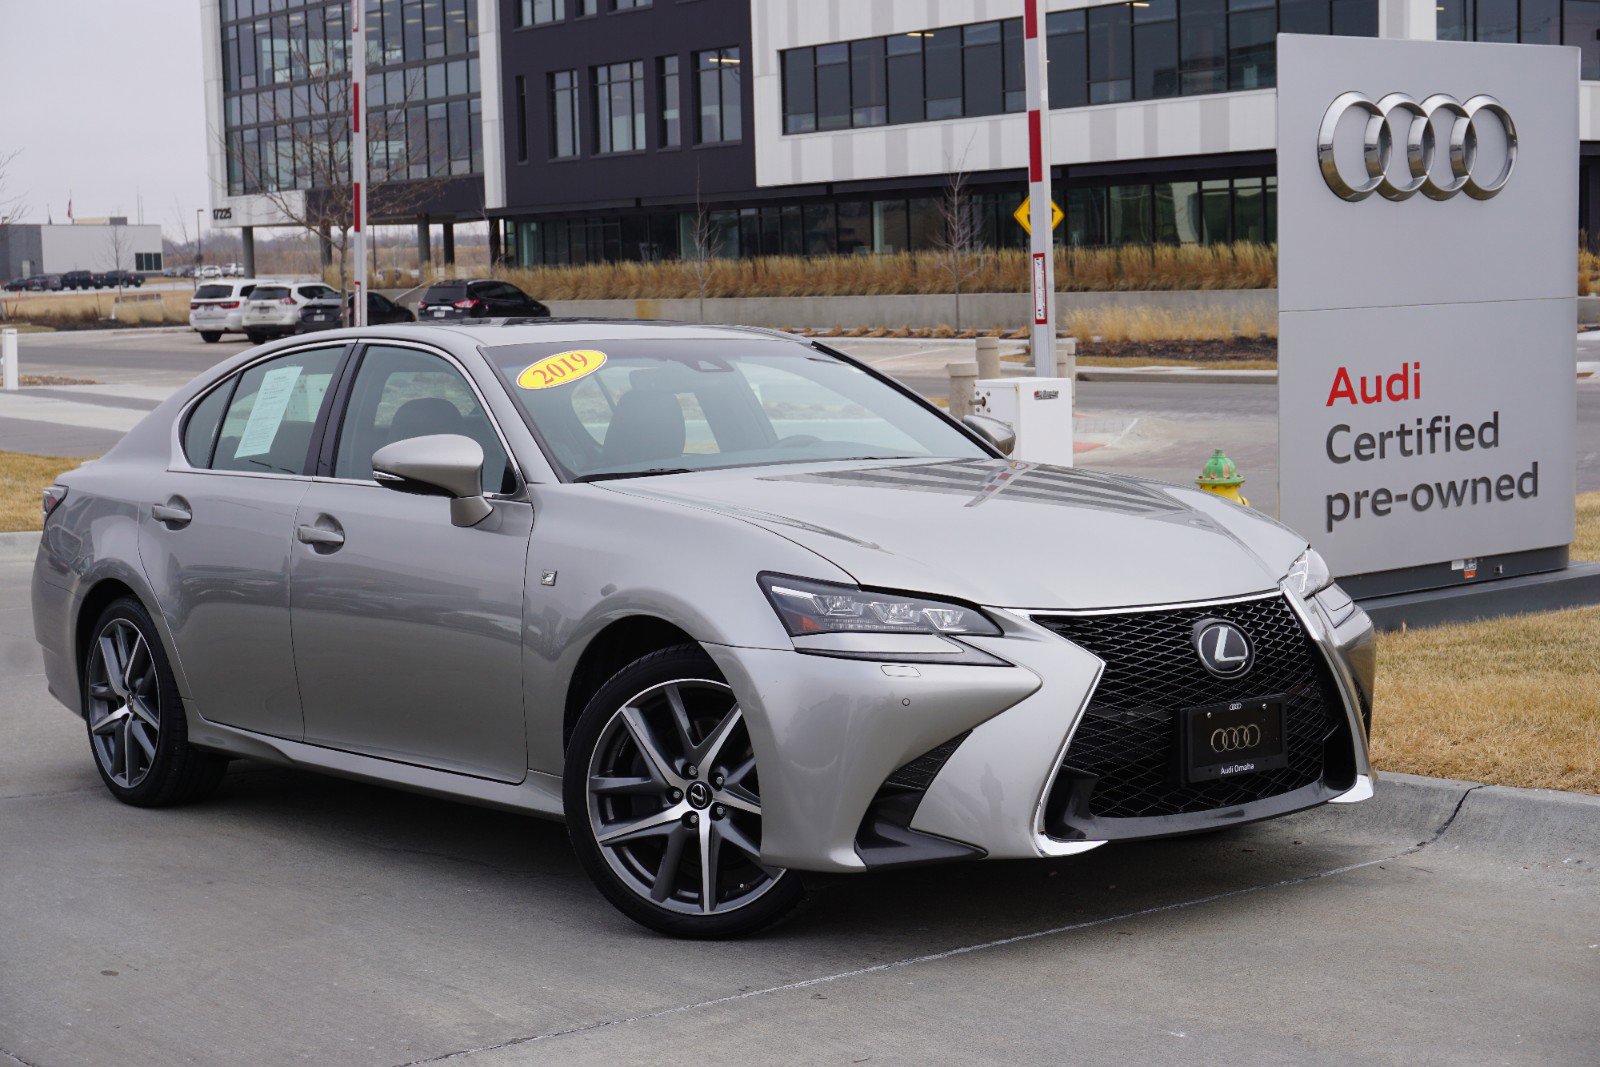 Certified Pre-Owned 2019 Lexus GS 350 F Sport 4dr Car in Omaha #AB016735A |  Baxter Auto Group